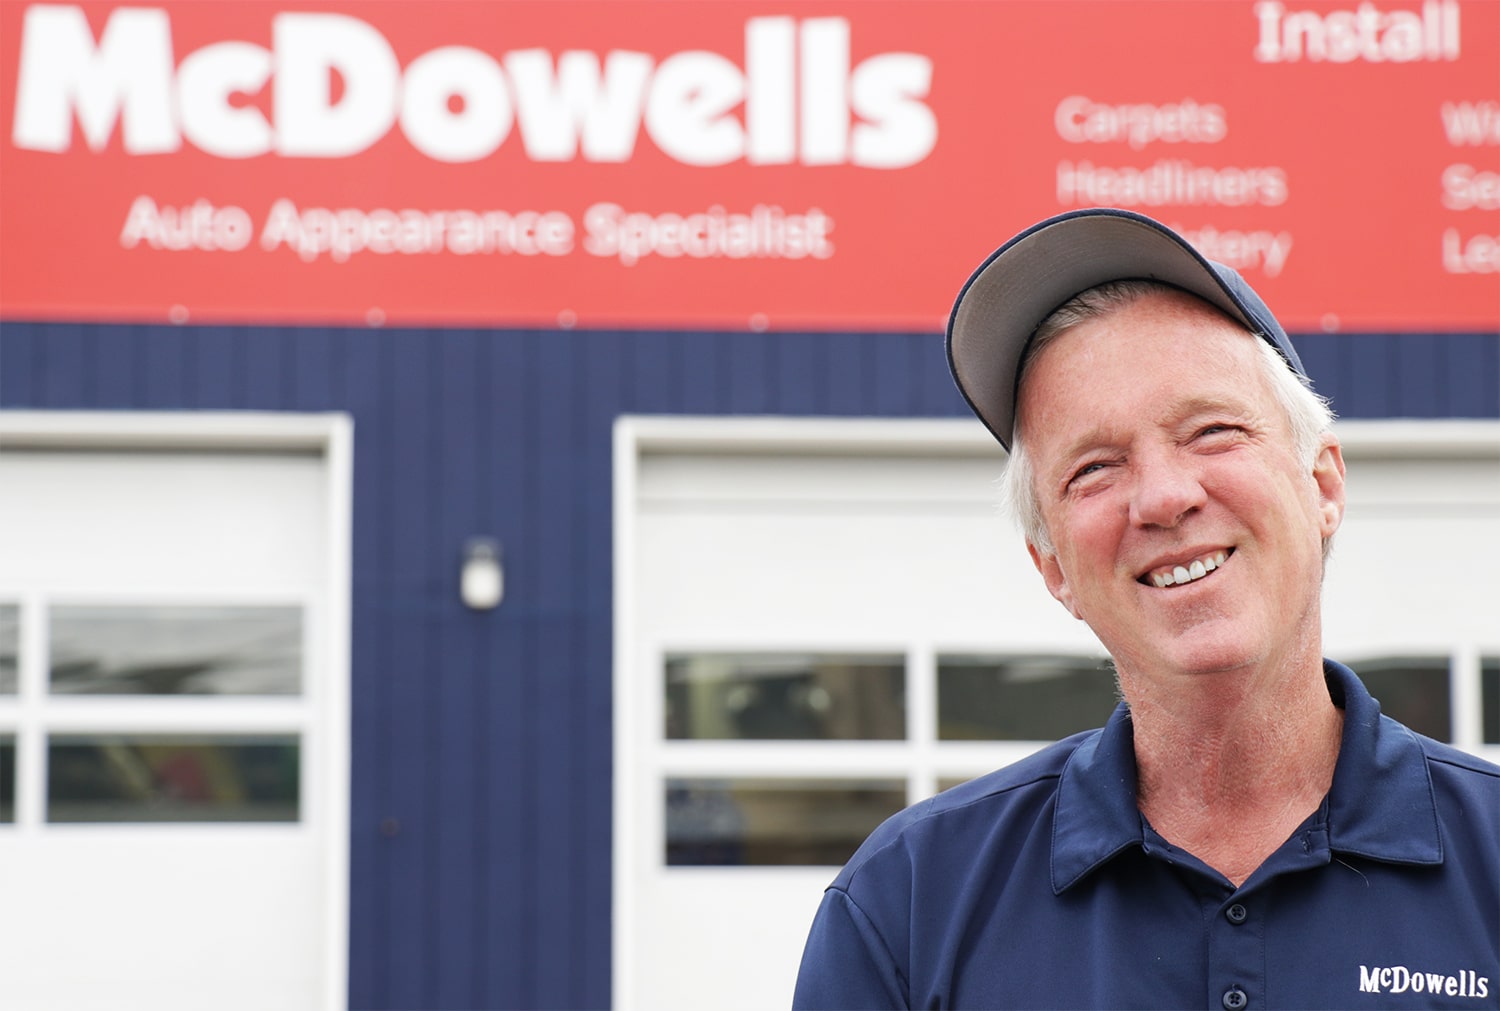 There is a picture of Bert, the Owner. He is standing in front of McDowell's building and smiling.